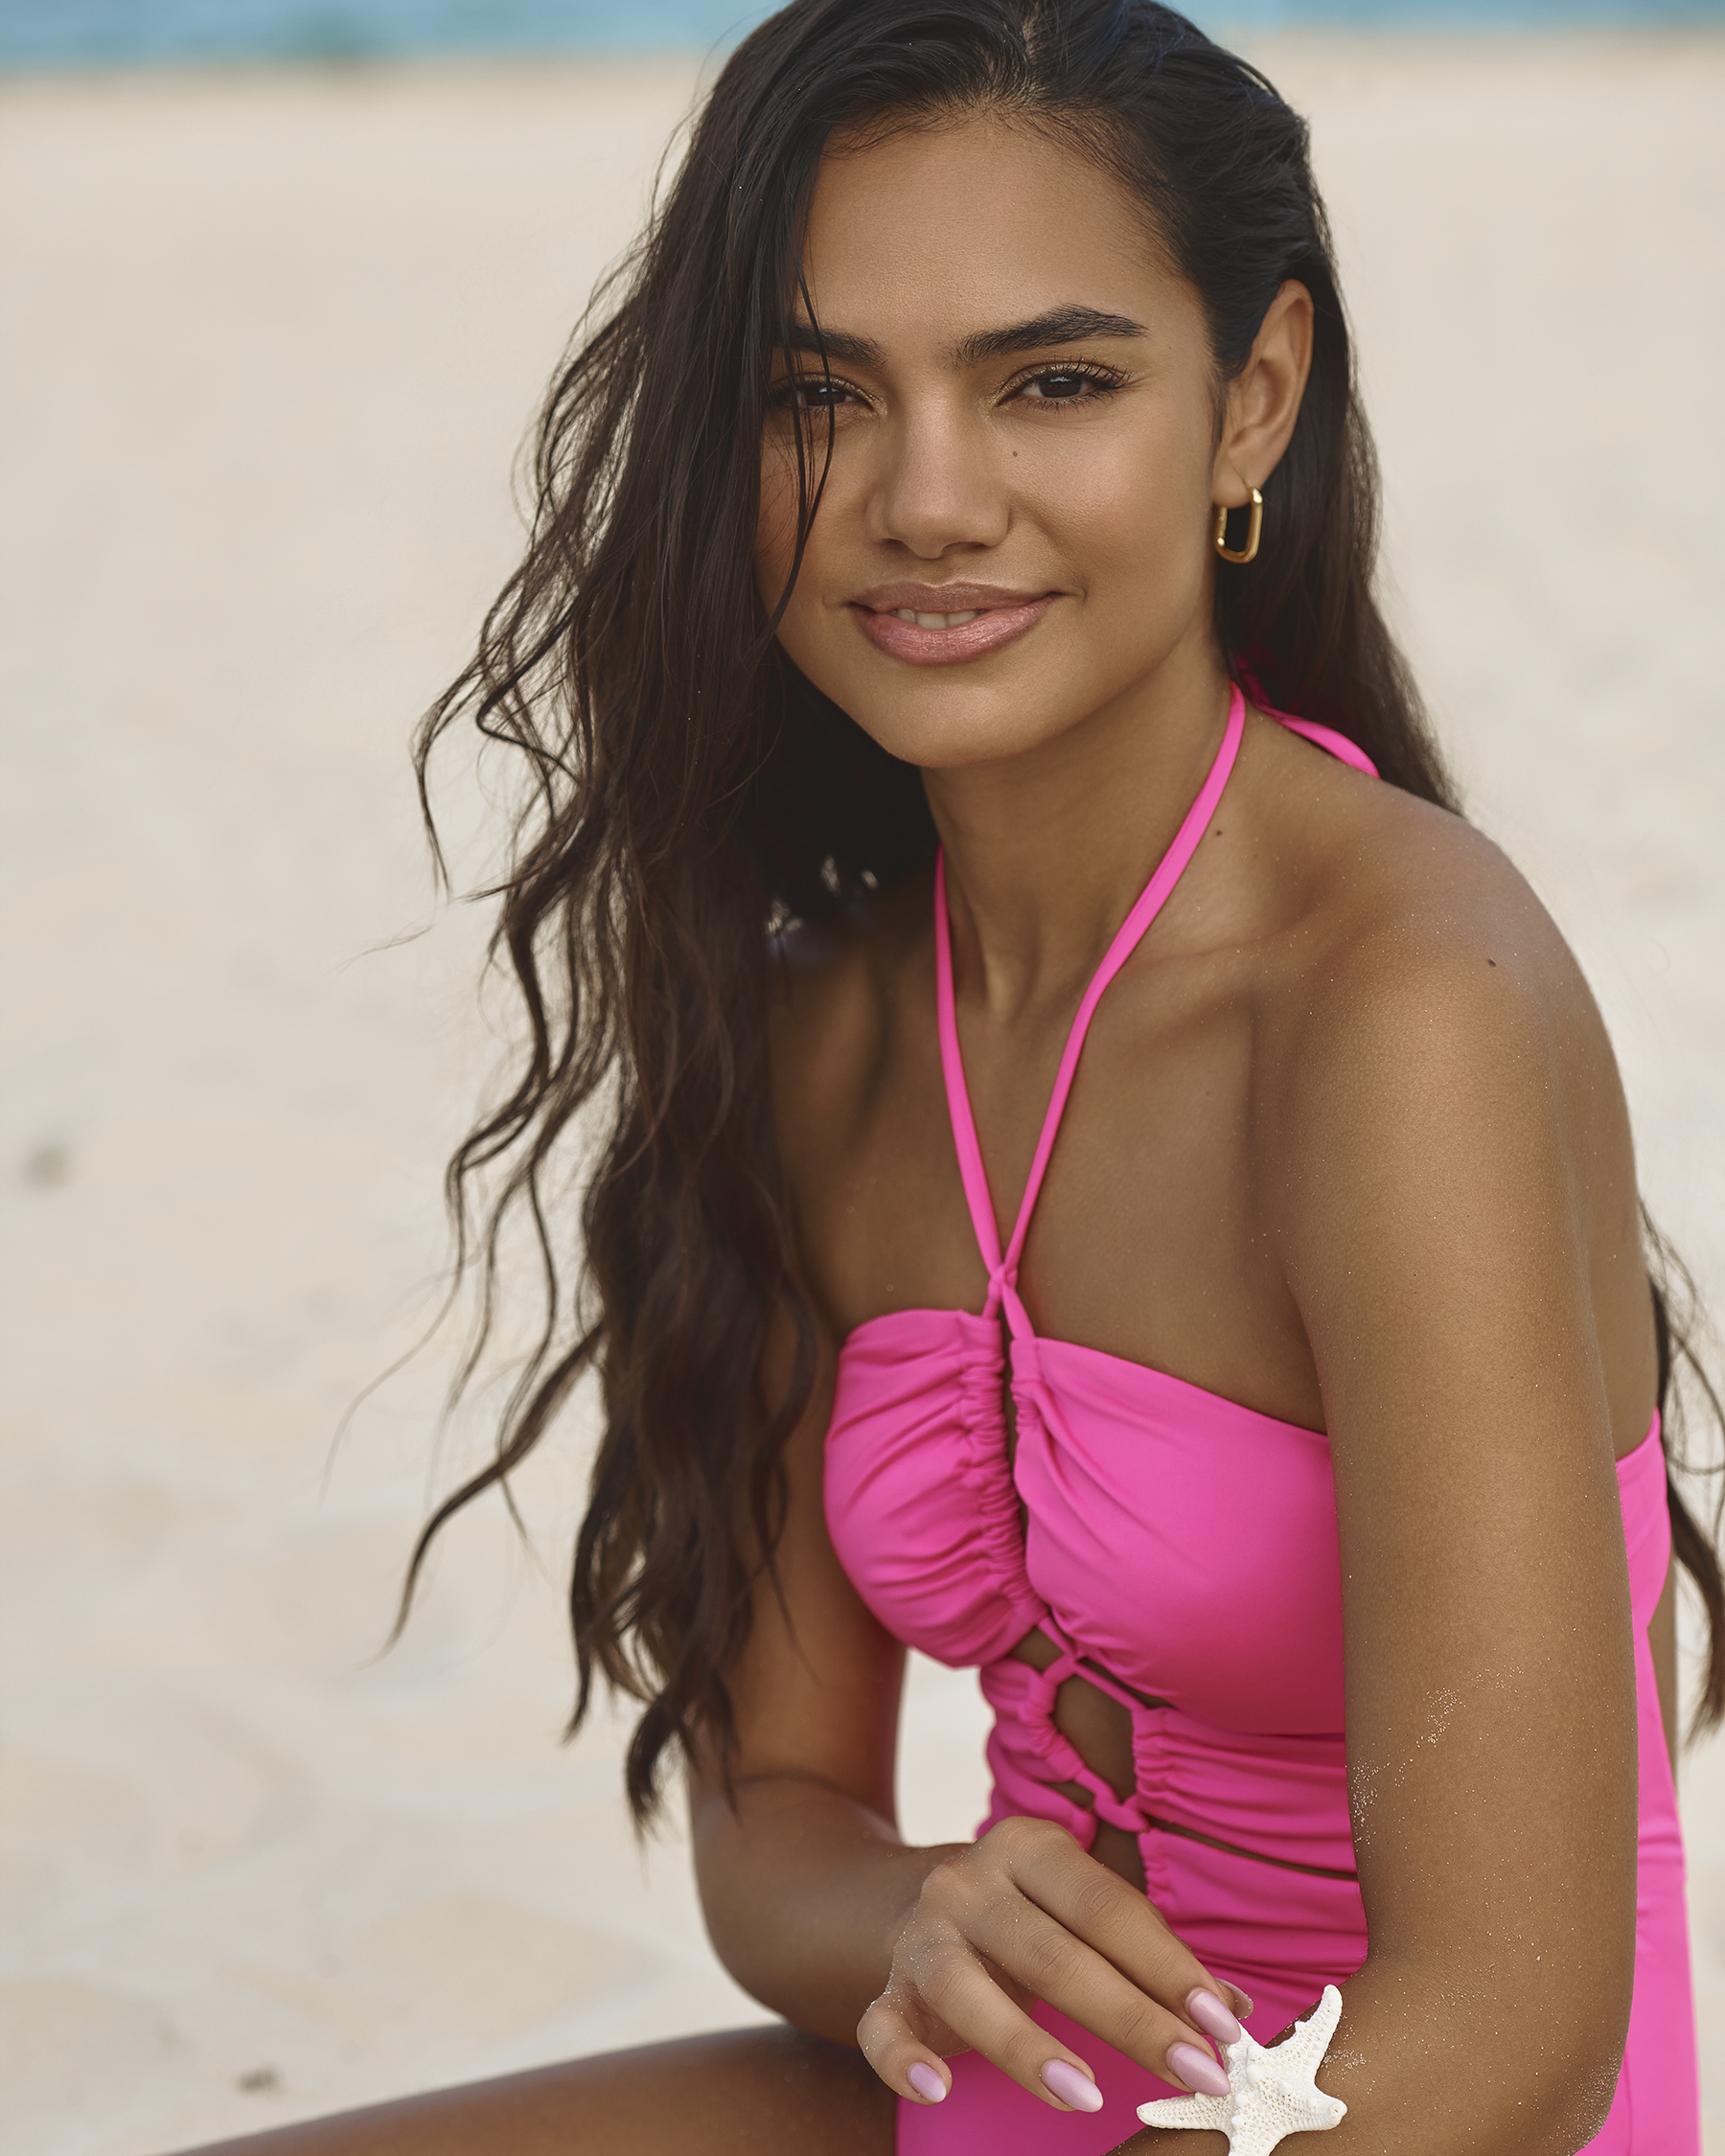 SEATONIC Neon Cut-out One-piece Swimsuit Neon Pink 01400061 - View5